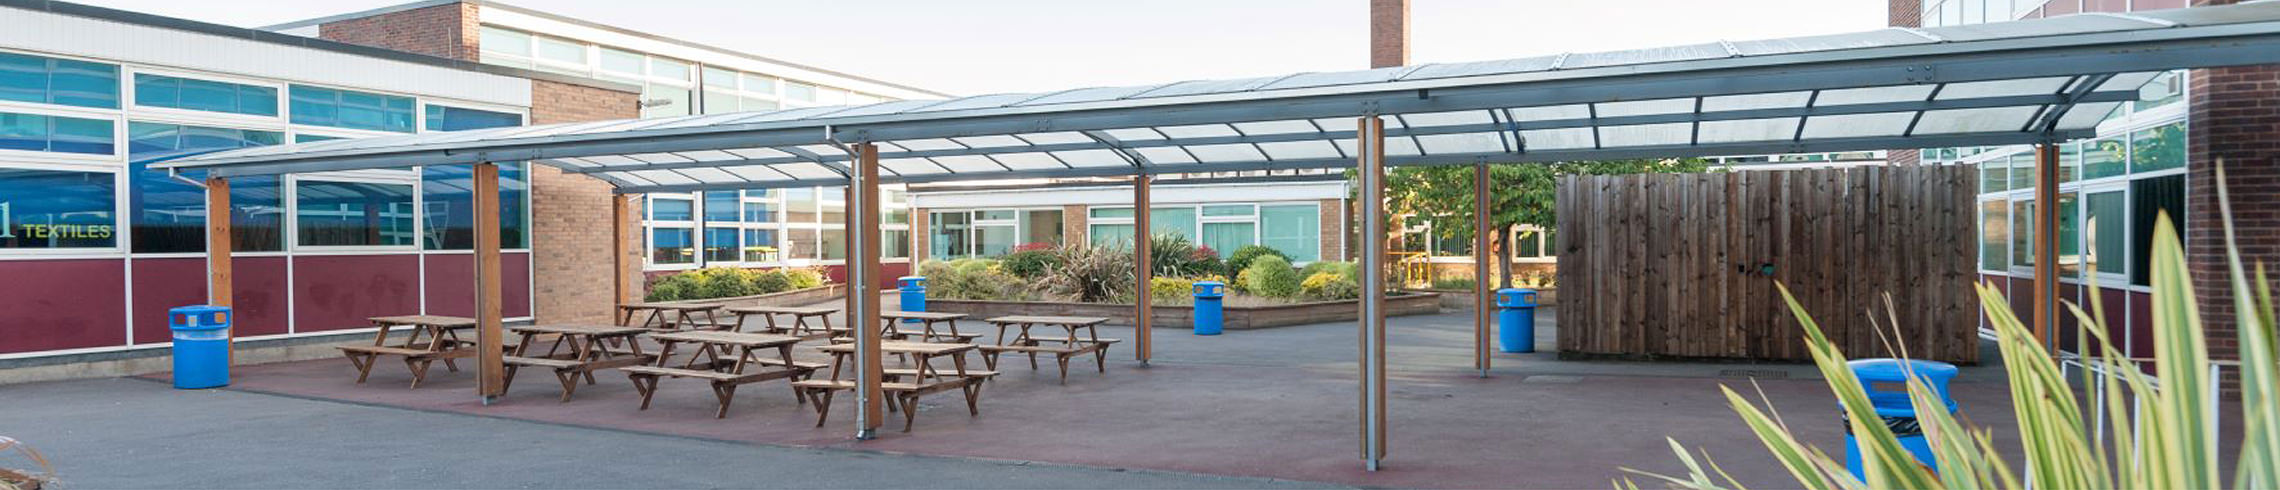 Outdoor classroom canopy, Dudley